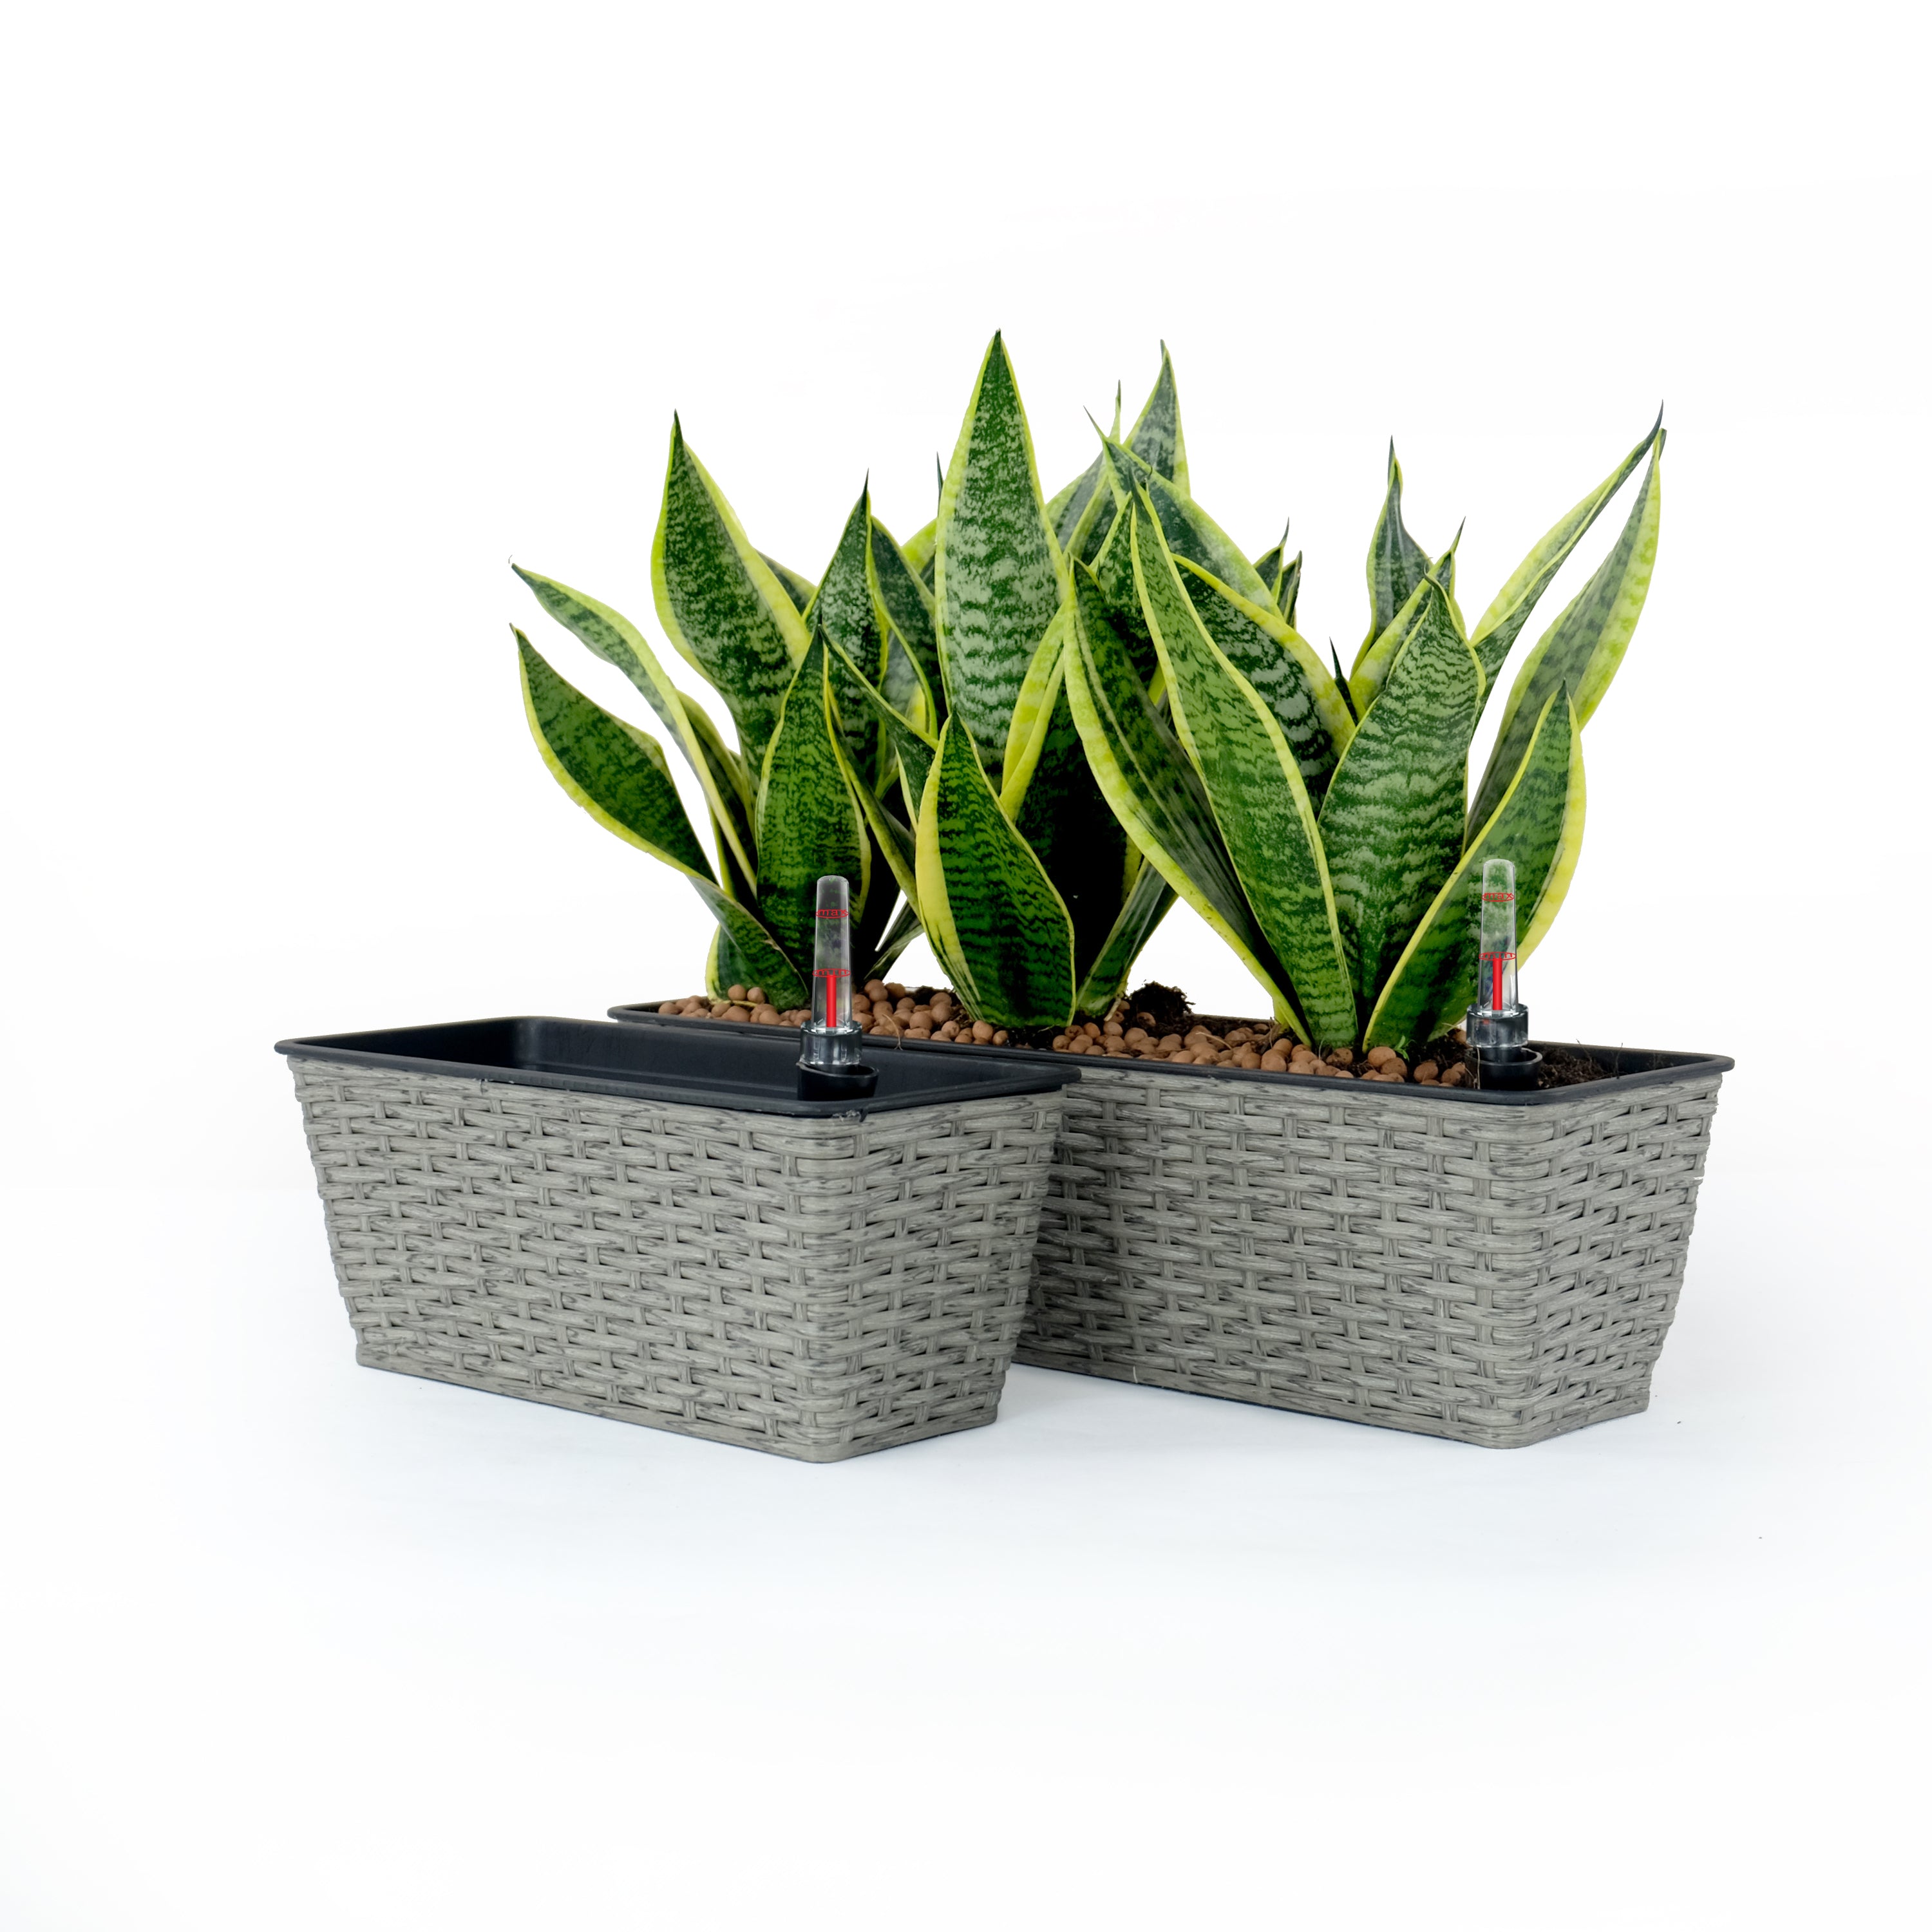 2-Pack-Smart-Self-watering-Rectangle-Planter-for-Indoor-and-Outdoor-Hand-Woven-Wicker-Gray-Pots-&-Planters